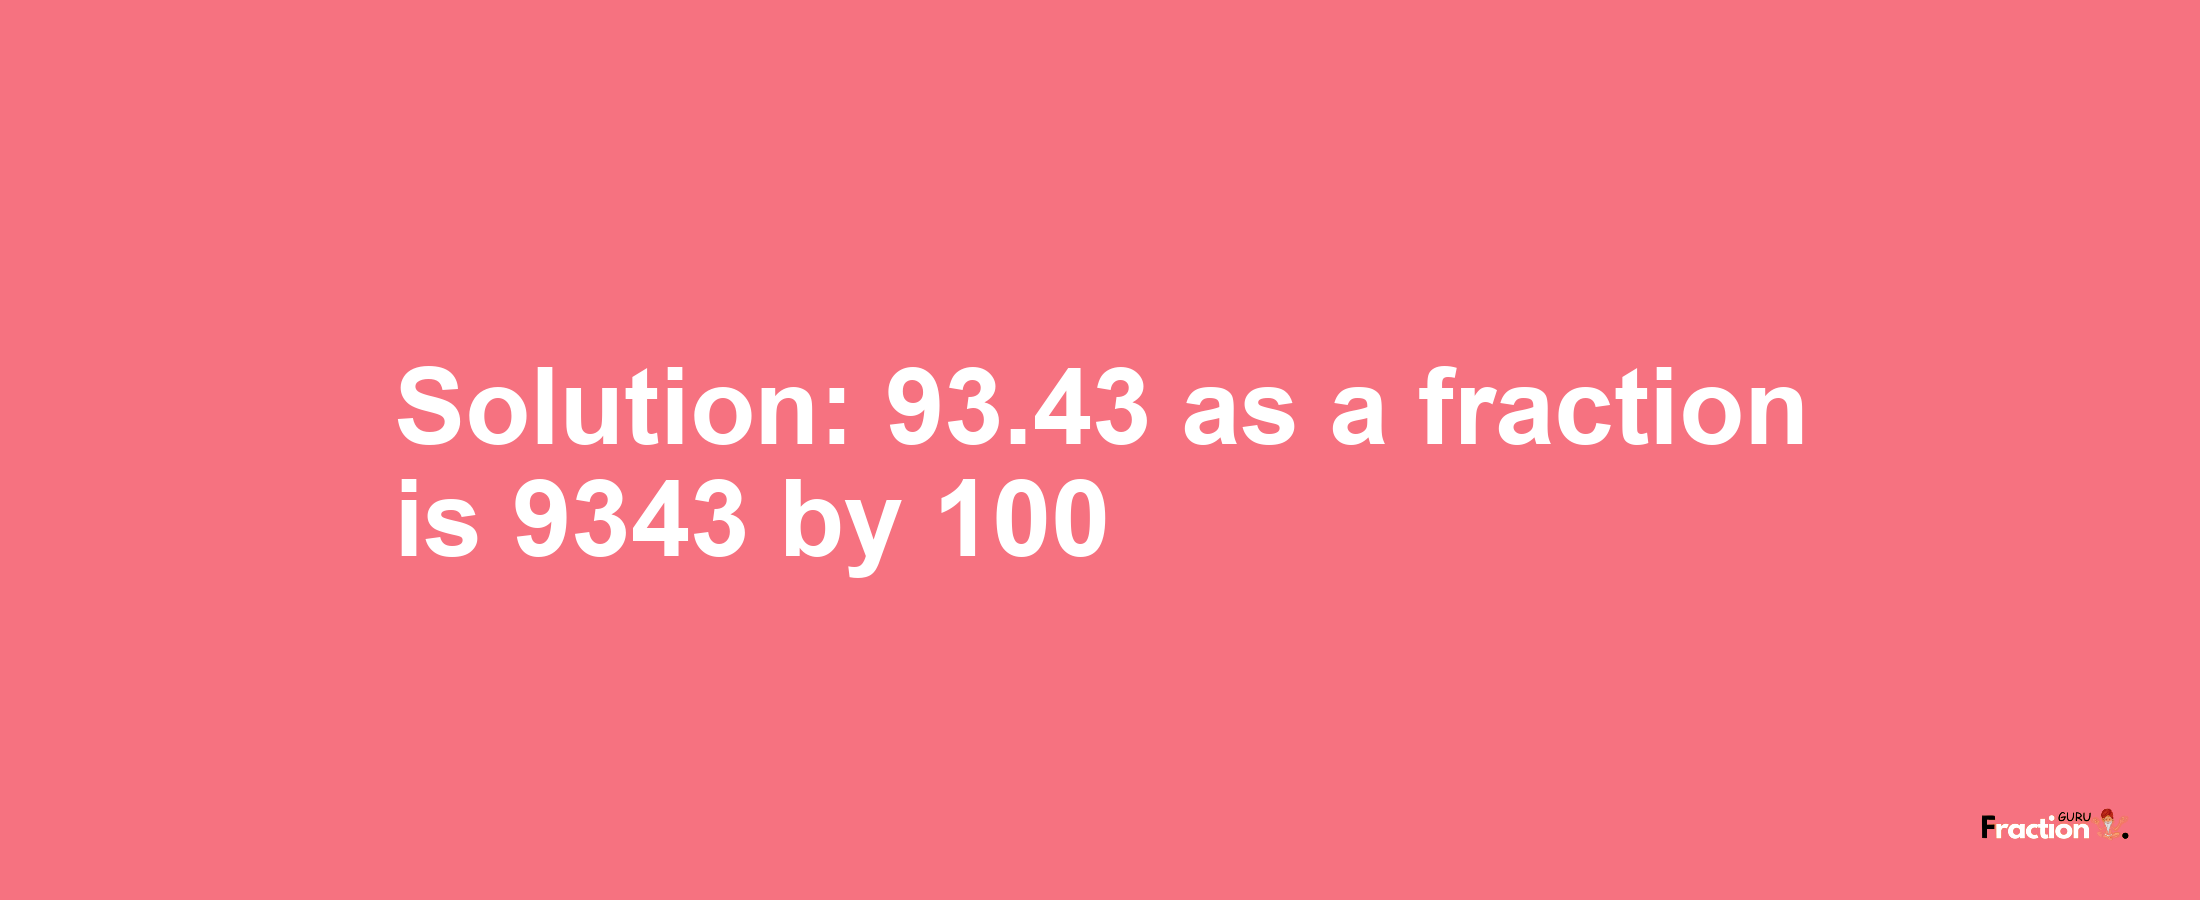 Solution:93.43 as a fraction is 9343/100